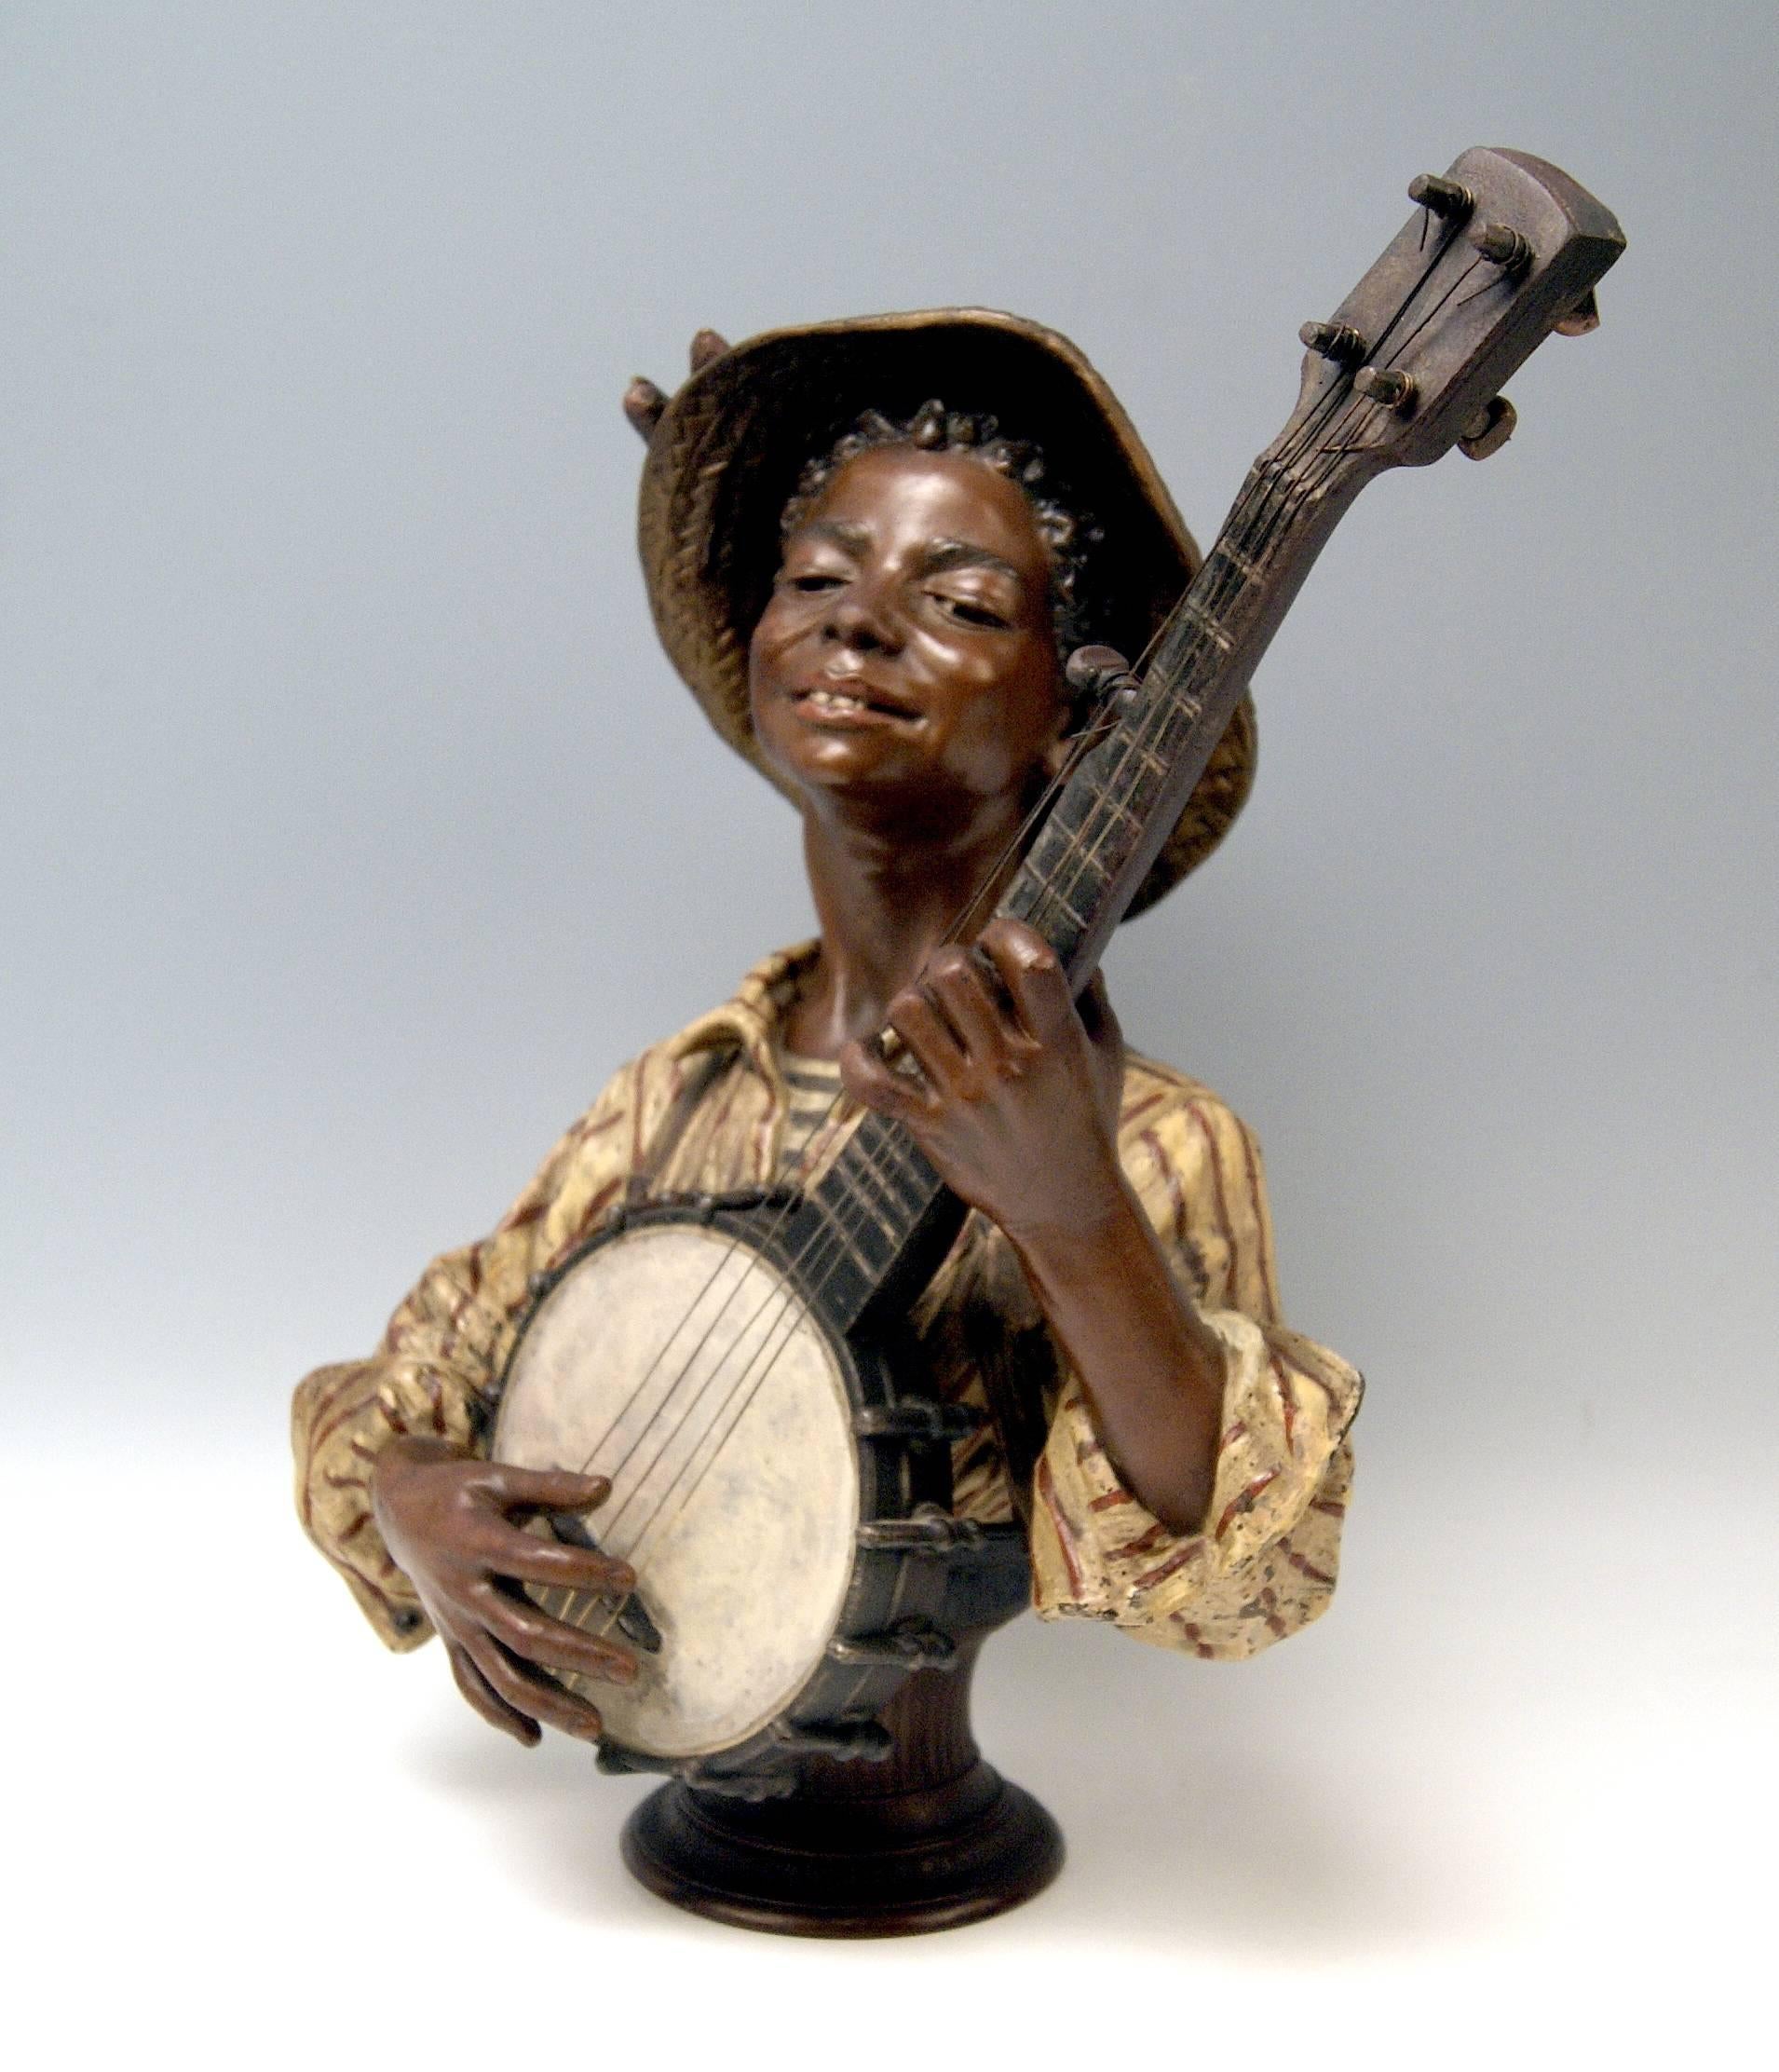 Goldscheider Friedrich bust (made of metal alloy  / painted):
Black boy playing banjo (=  an american instrument).
Made by Goldscheider French Manufactory in Paris: Founded in year 1892 by Friedrich Goldscheider (1845-1897) / the manufactory was